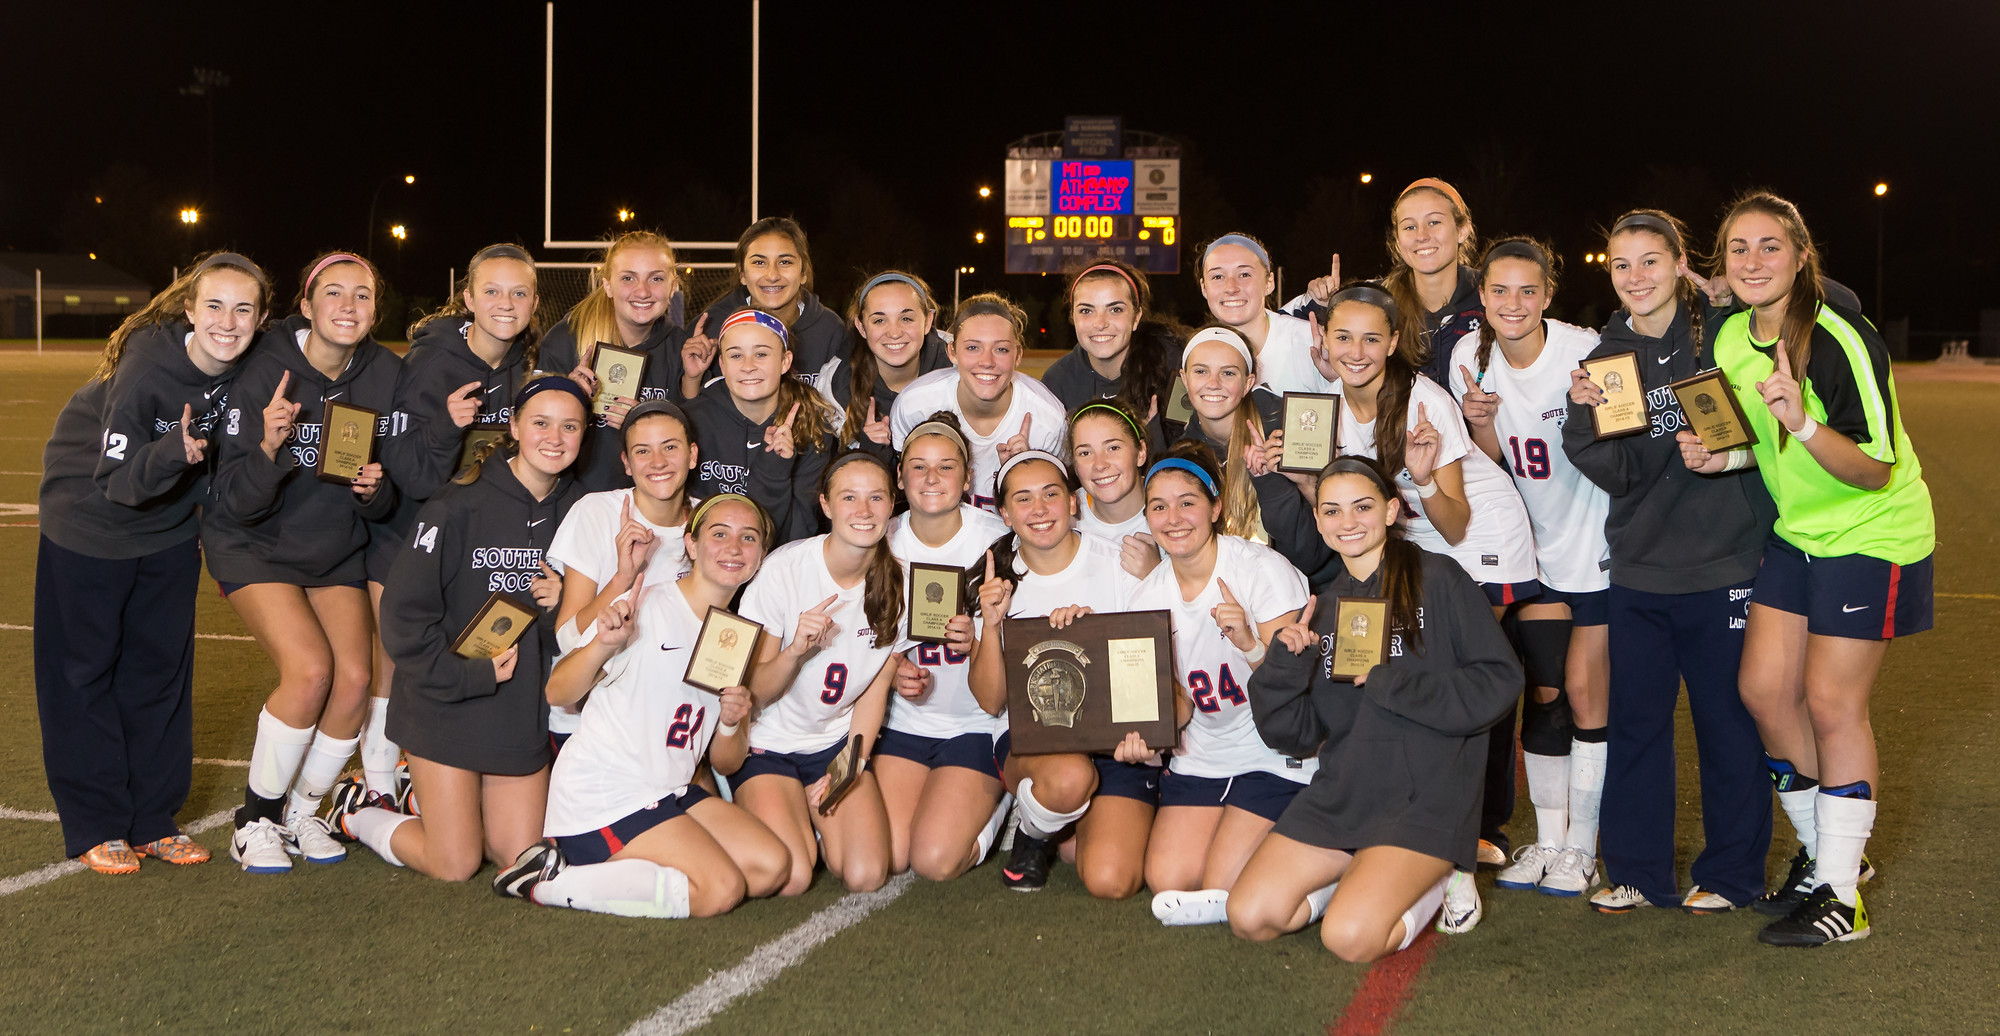 South Side regained the Nassau County Class A girls’ soccer championship on Tuesday night by defeating Garden City, 1-0, on a goal with 5:48 remaining.